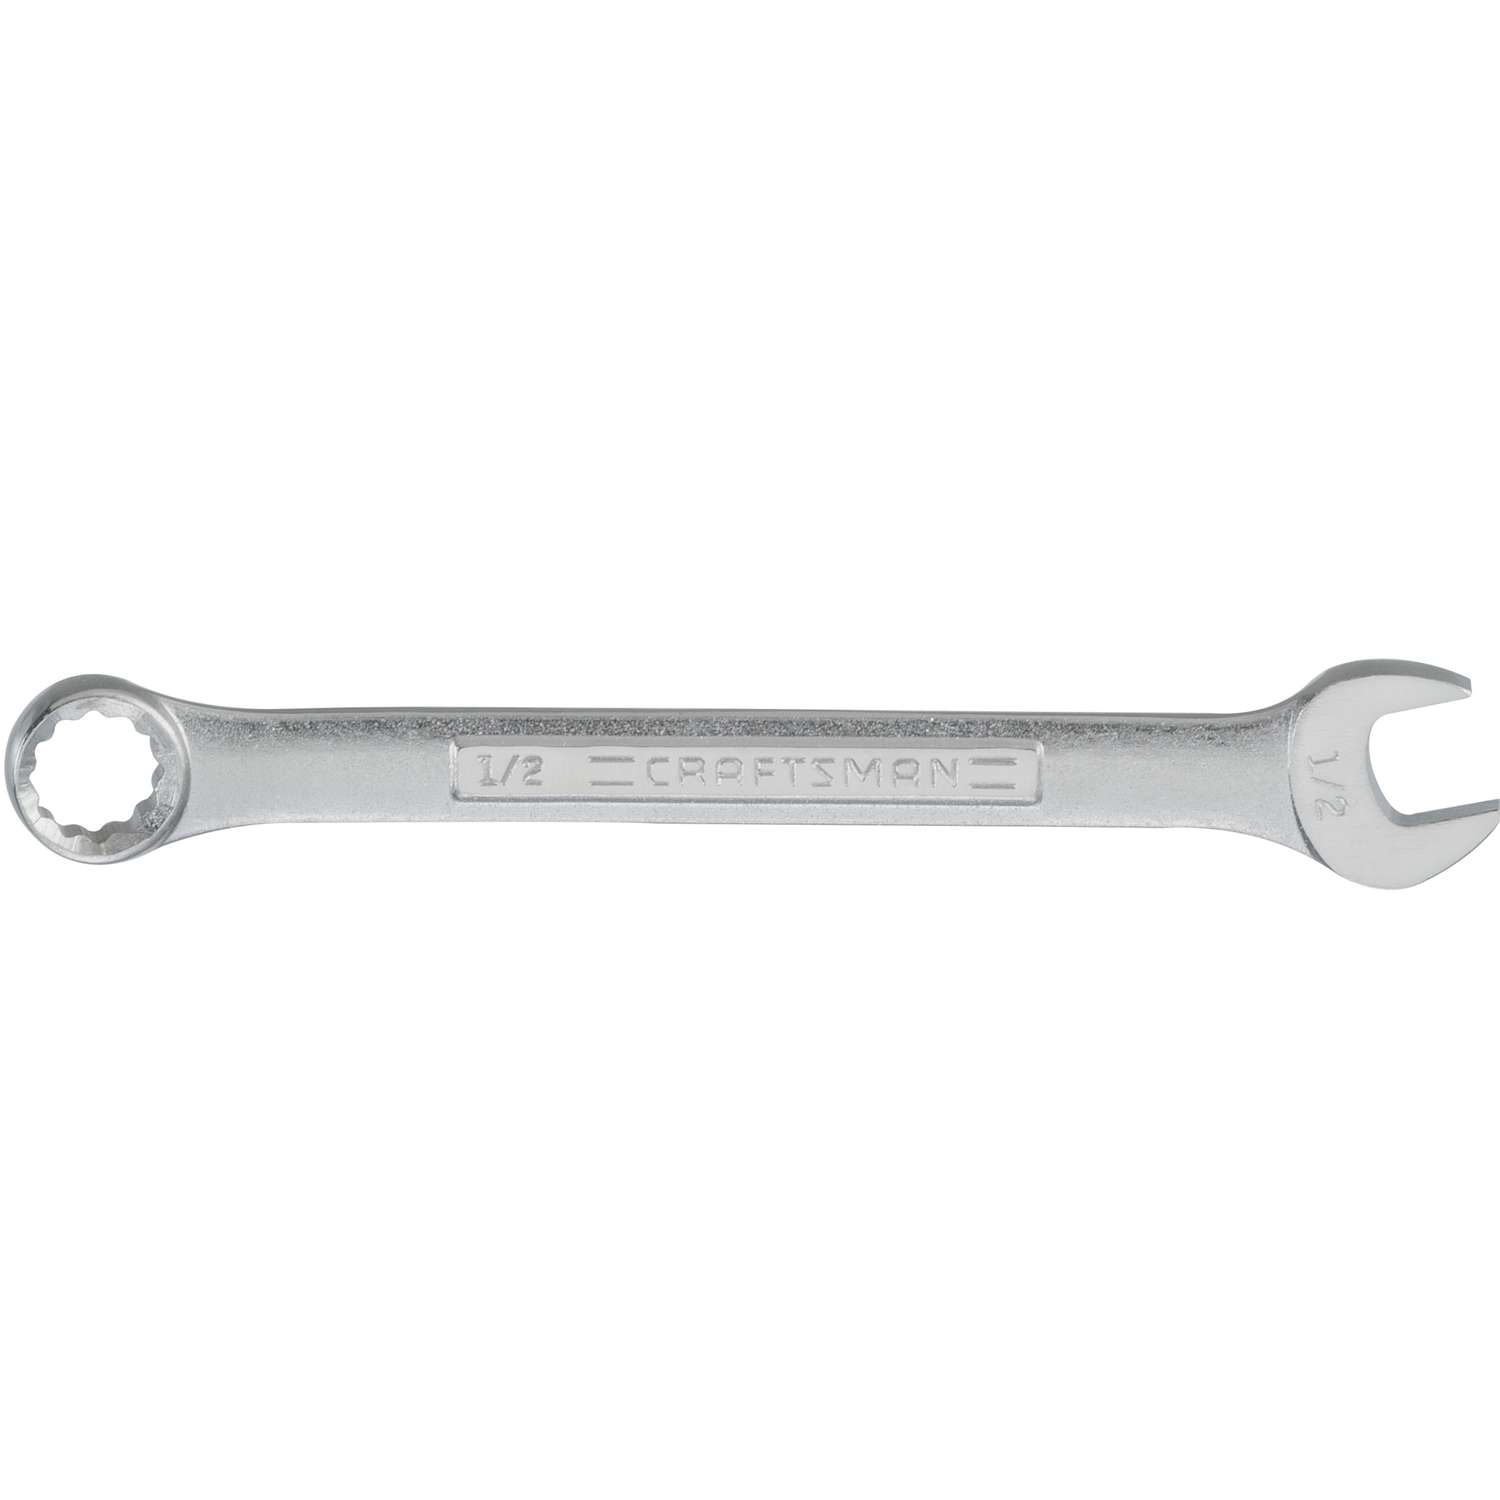 Craftsman 10 x 11mm Wrench Alloy Steel 12 Point Box End Rust Corrosion Resistant 